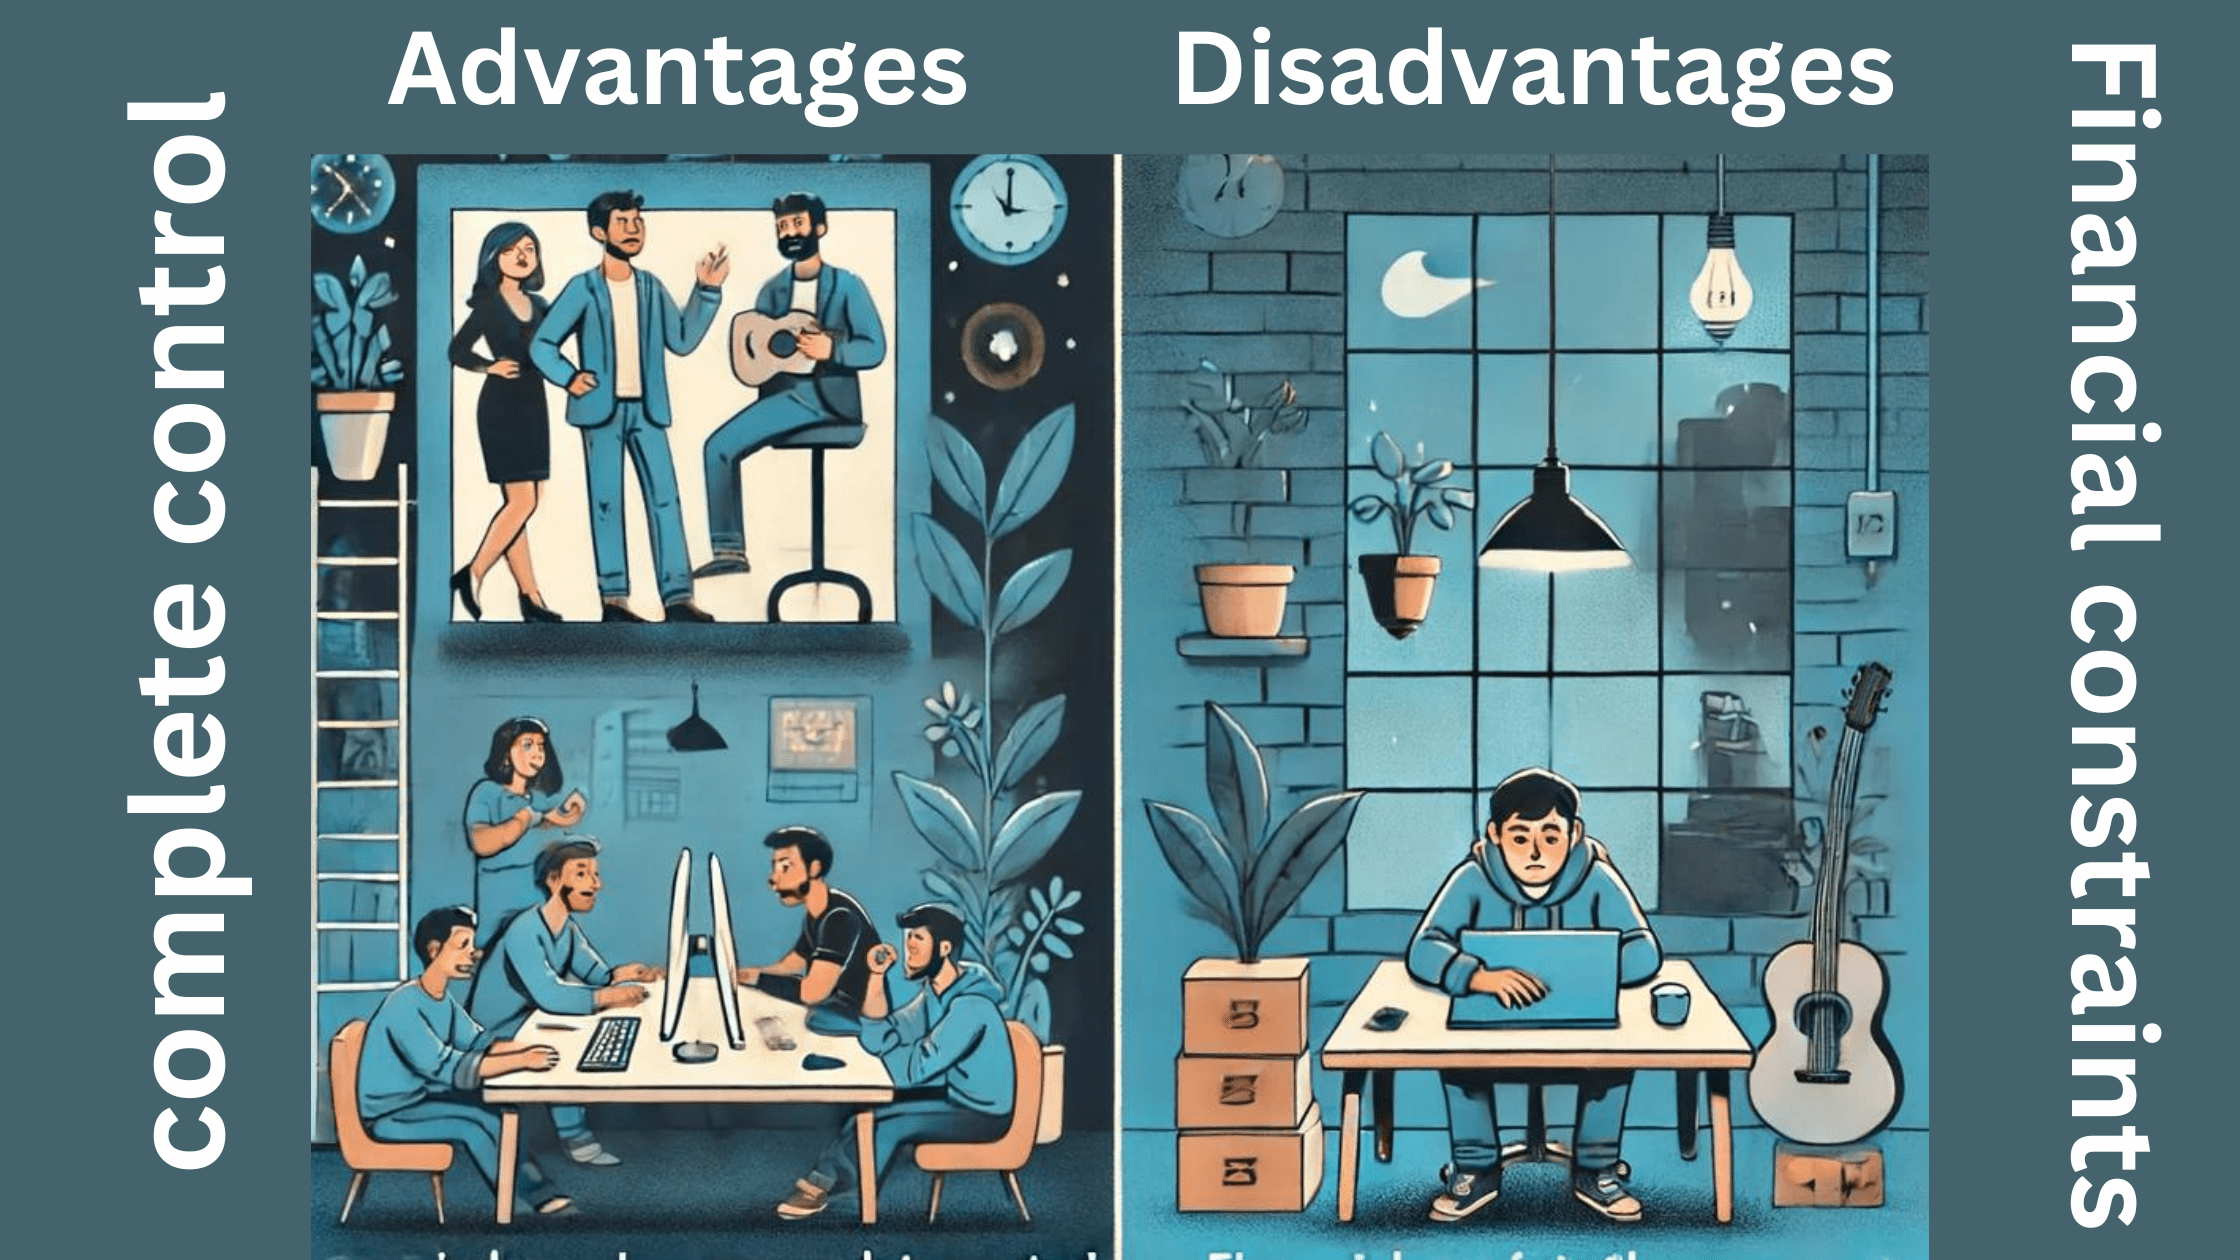 Illustration depicting the advantages and disadvantages of bootstrapping for startups, highlighting independence, control, and collaboration on one side, and financial constraints, slower growth, and personal risk on the other.